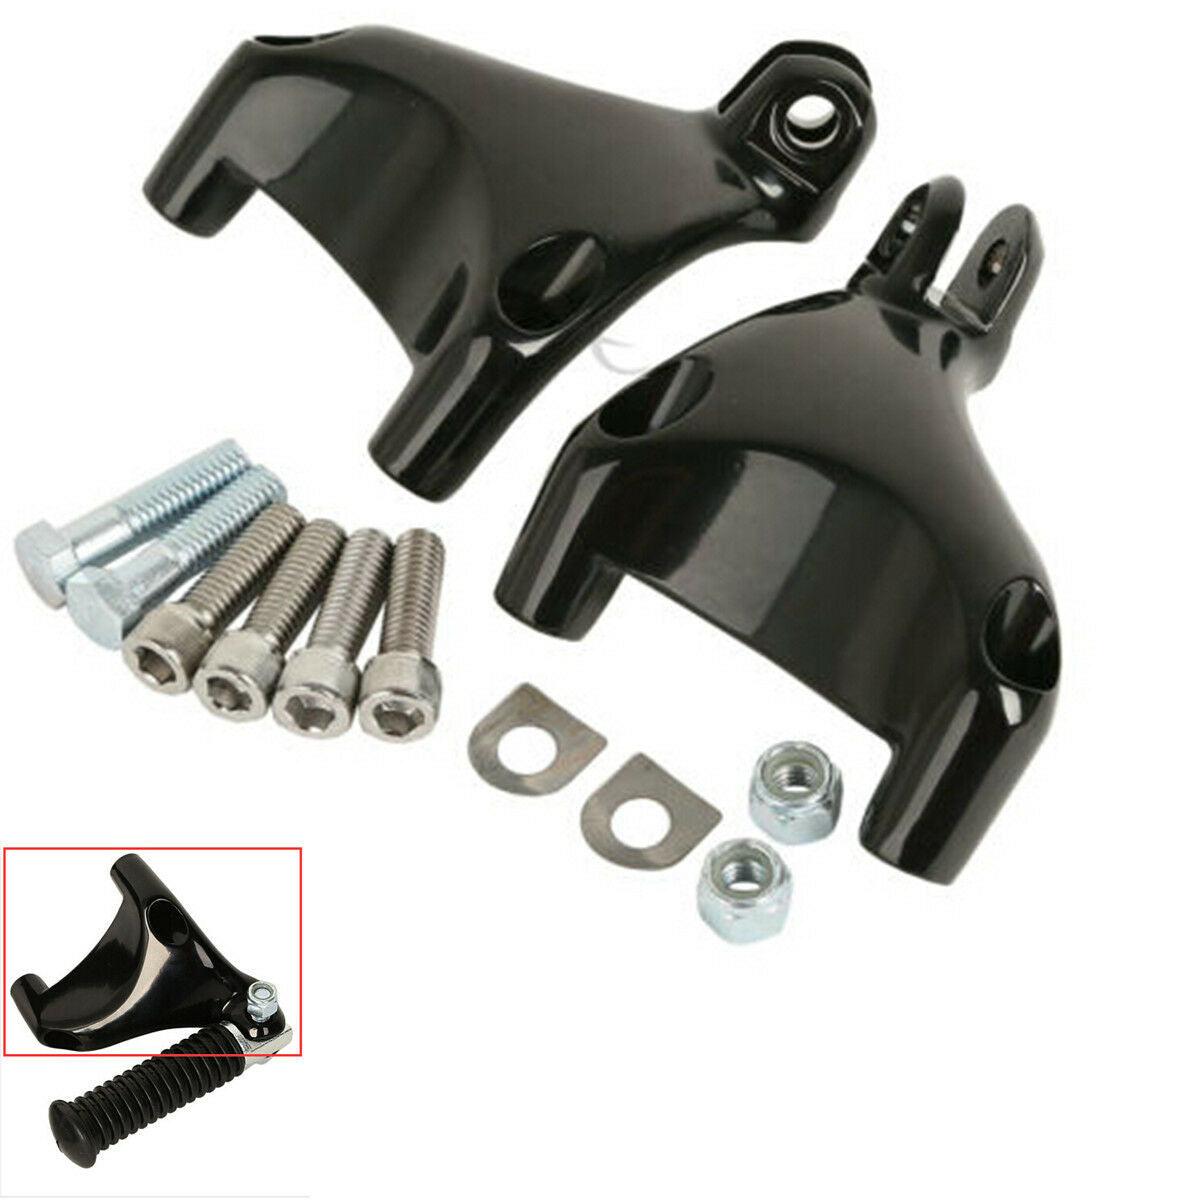 Passenger Foot Pegs Mount Fit For Harley Davidson 883 1200 XL Sportster 04-13 - Moto Life Products